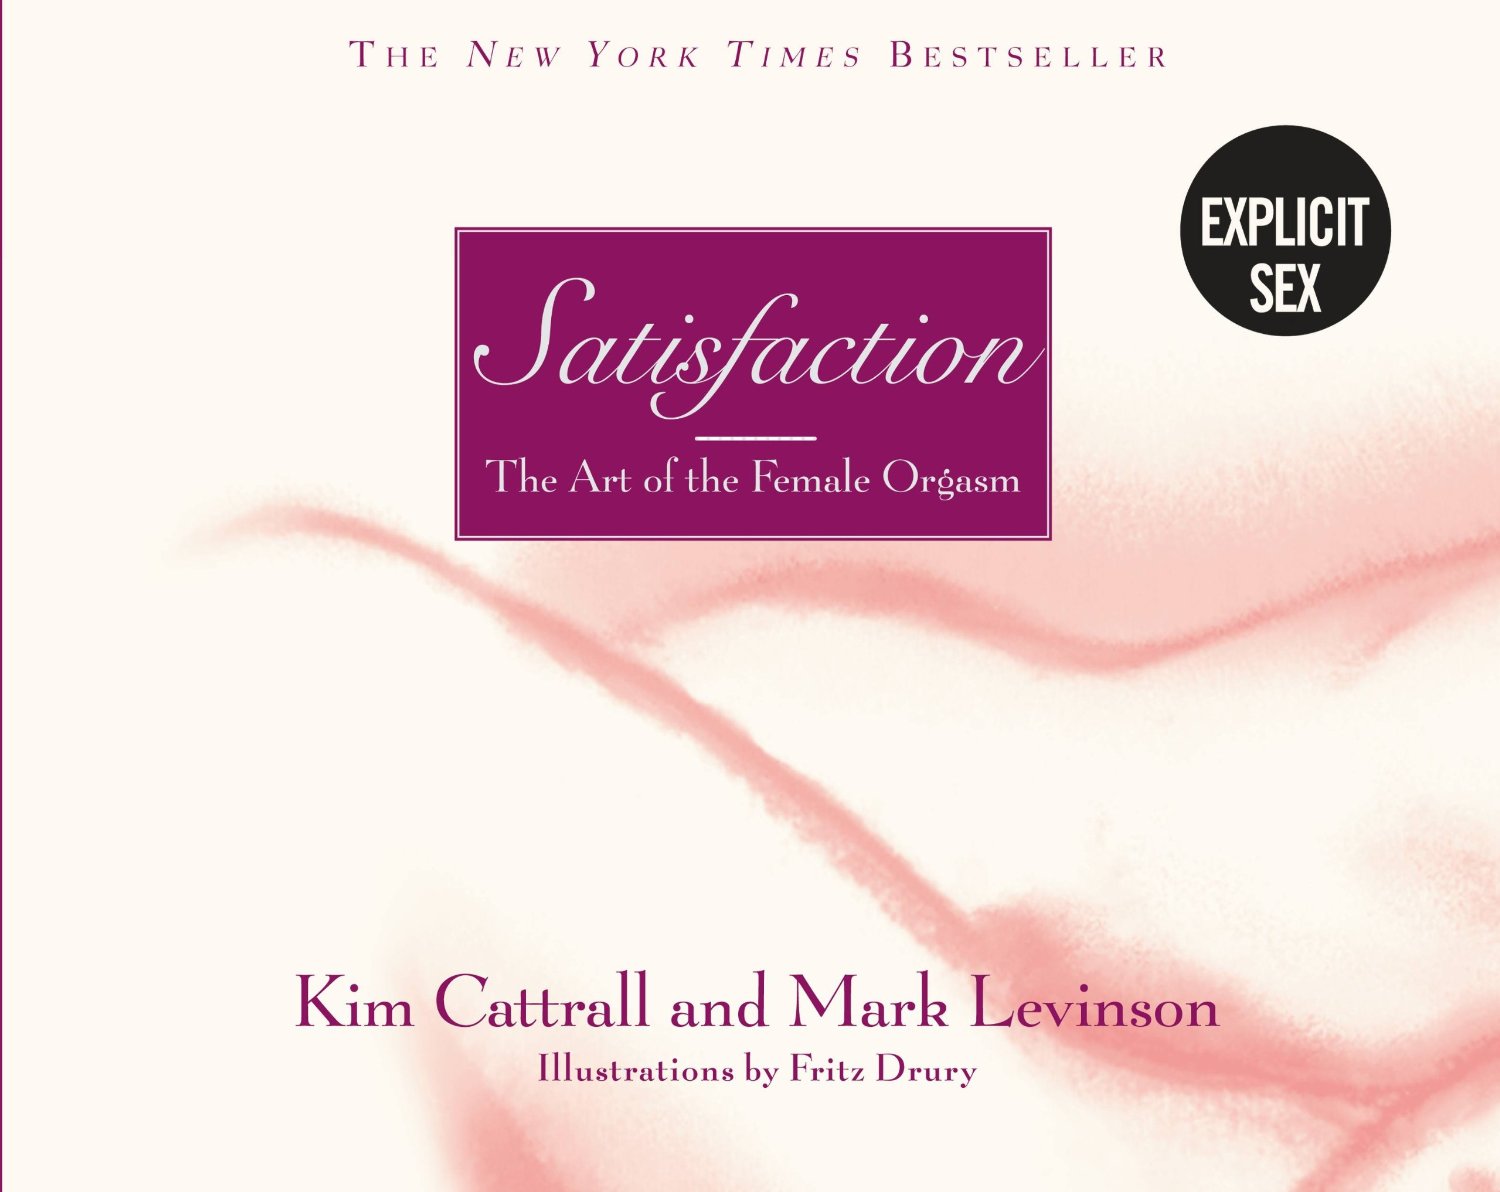 Review: "Satisfaction: The Art of the Female Orgasm", by Kim Cattrall and Mark Levinson 4